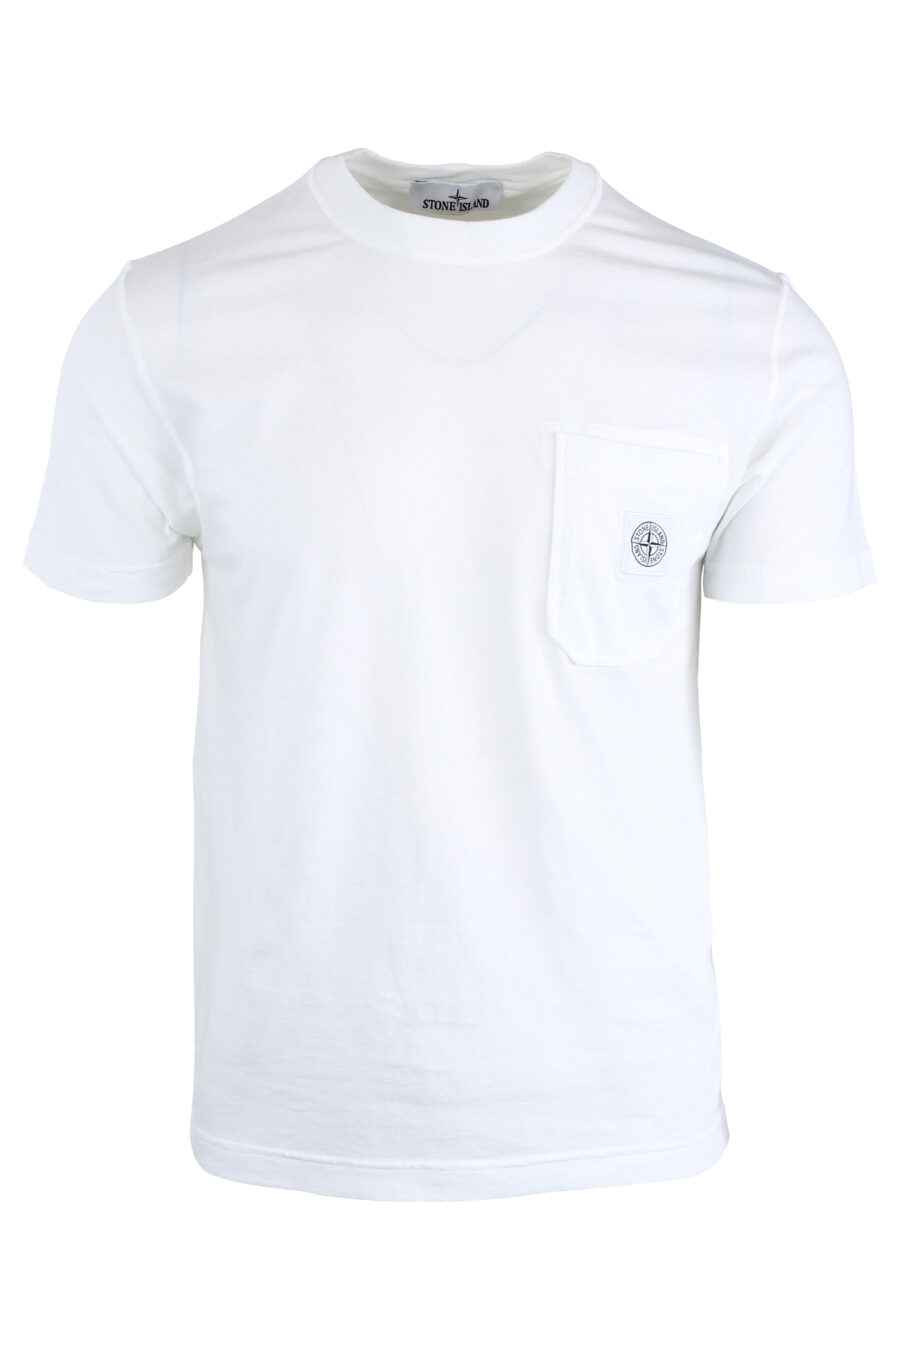 White T-shirt with pocket - IMG 1685